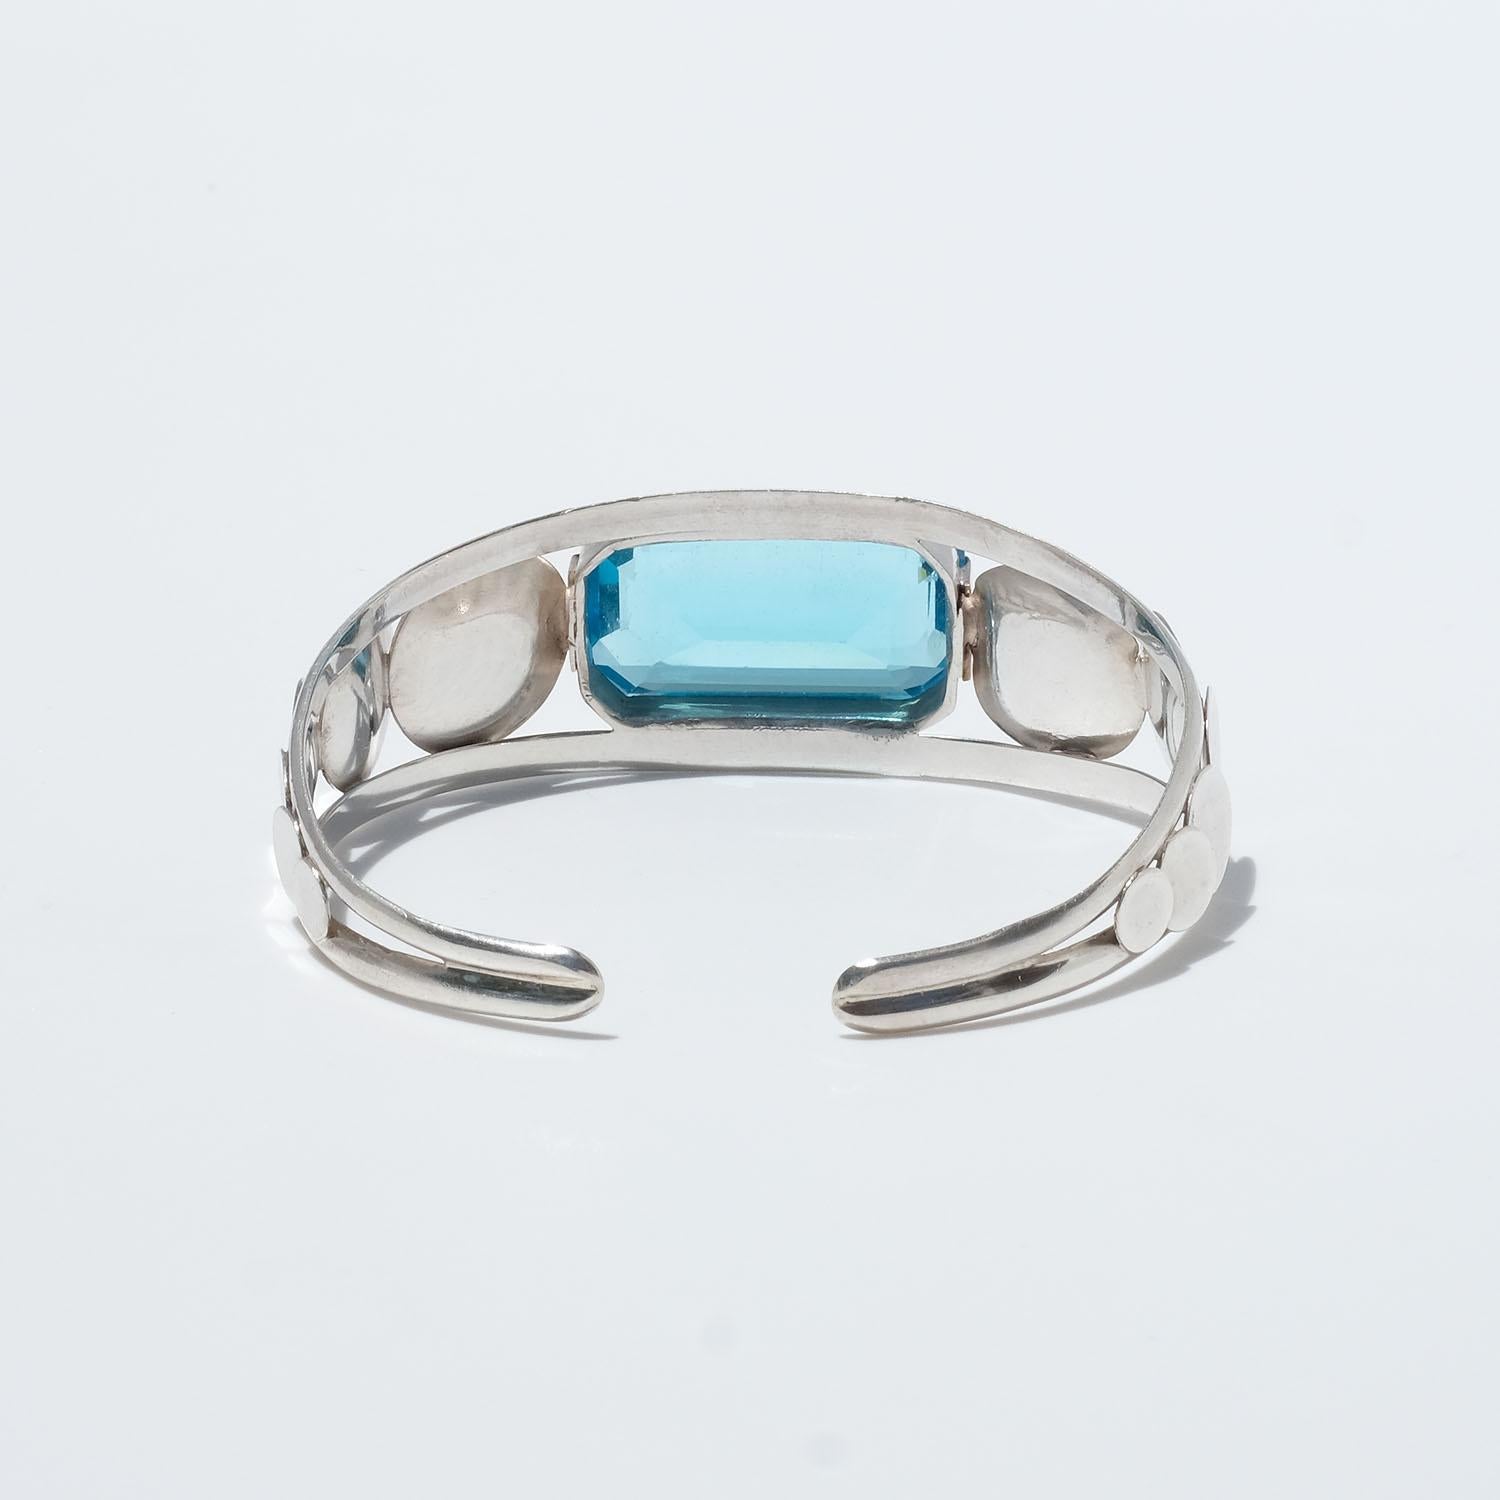 Vintage Silver and Turquoise Stone Cuff Bracelet Made 1955 For Sale 1